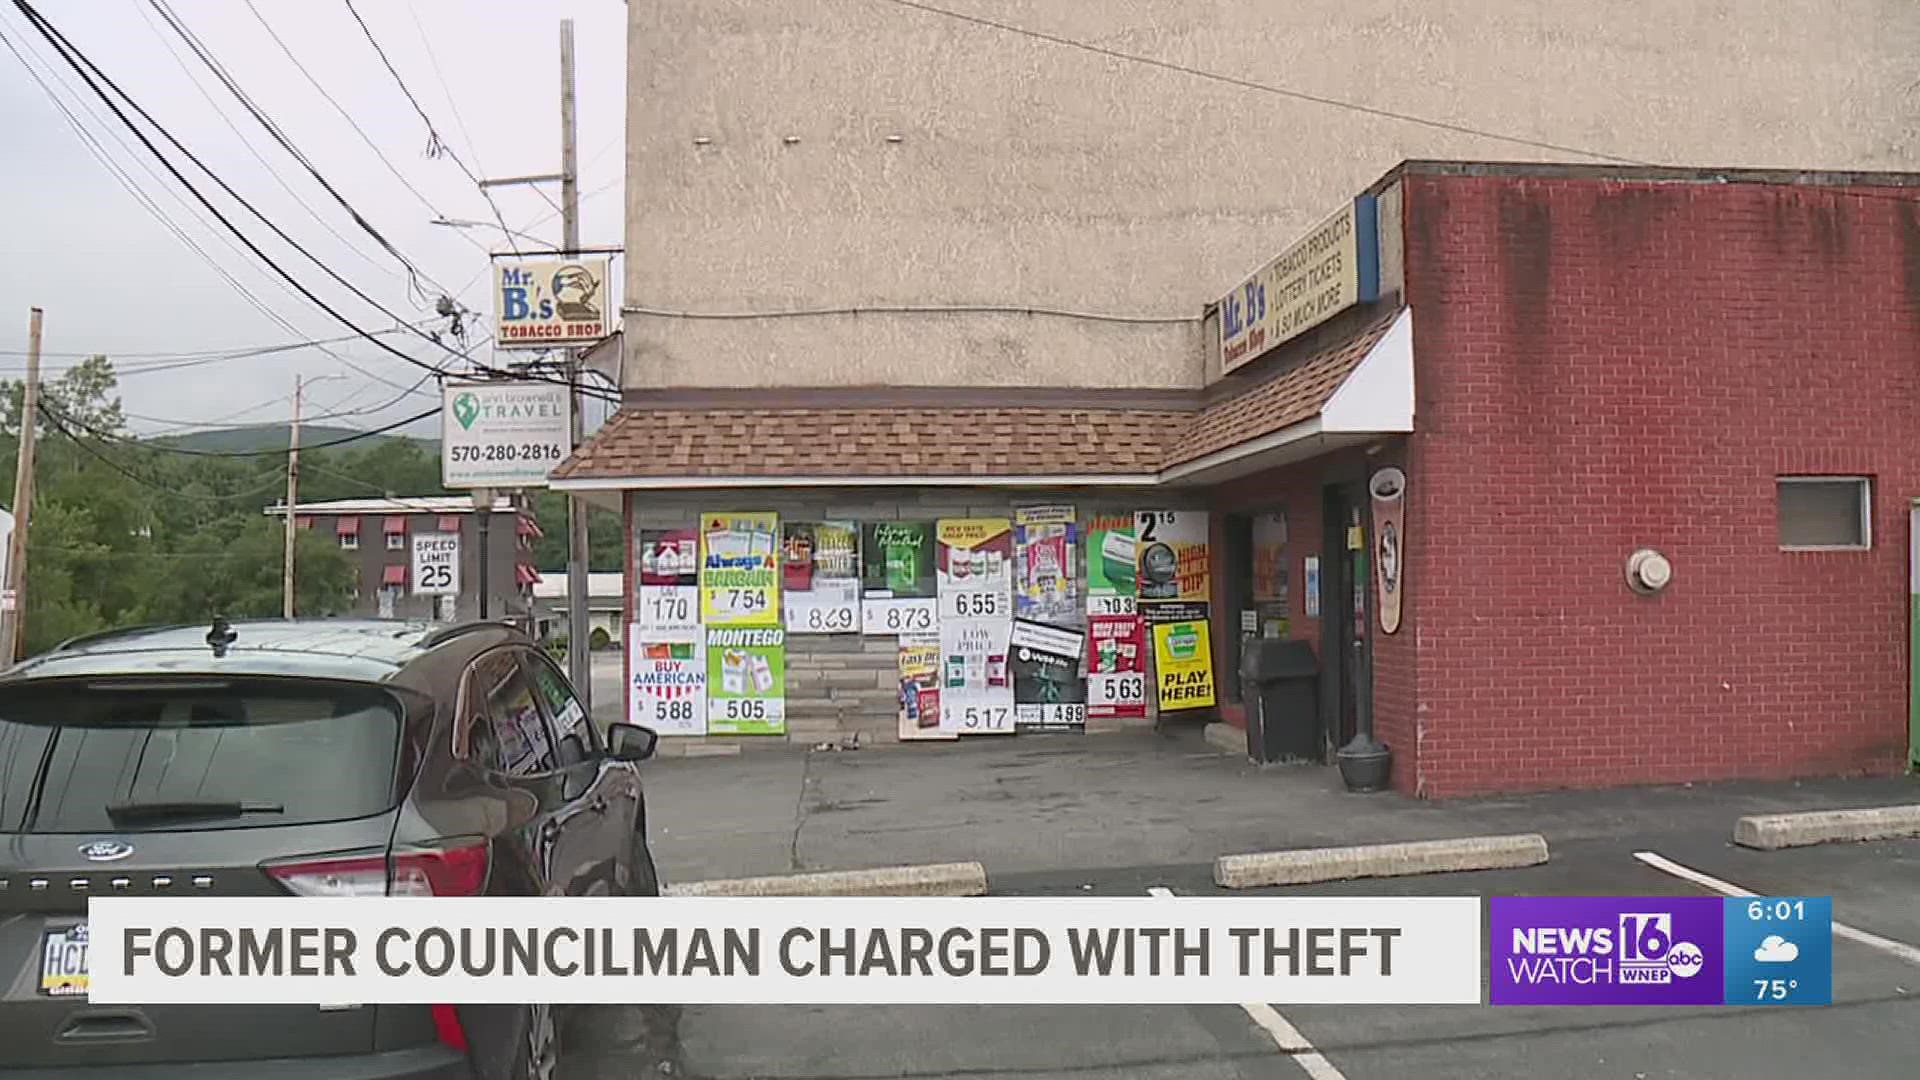 A former city councilman in Lackawanna County turned himself in Monday morning to face theft and forgery charges.